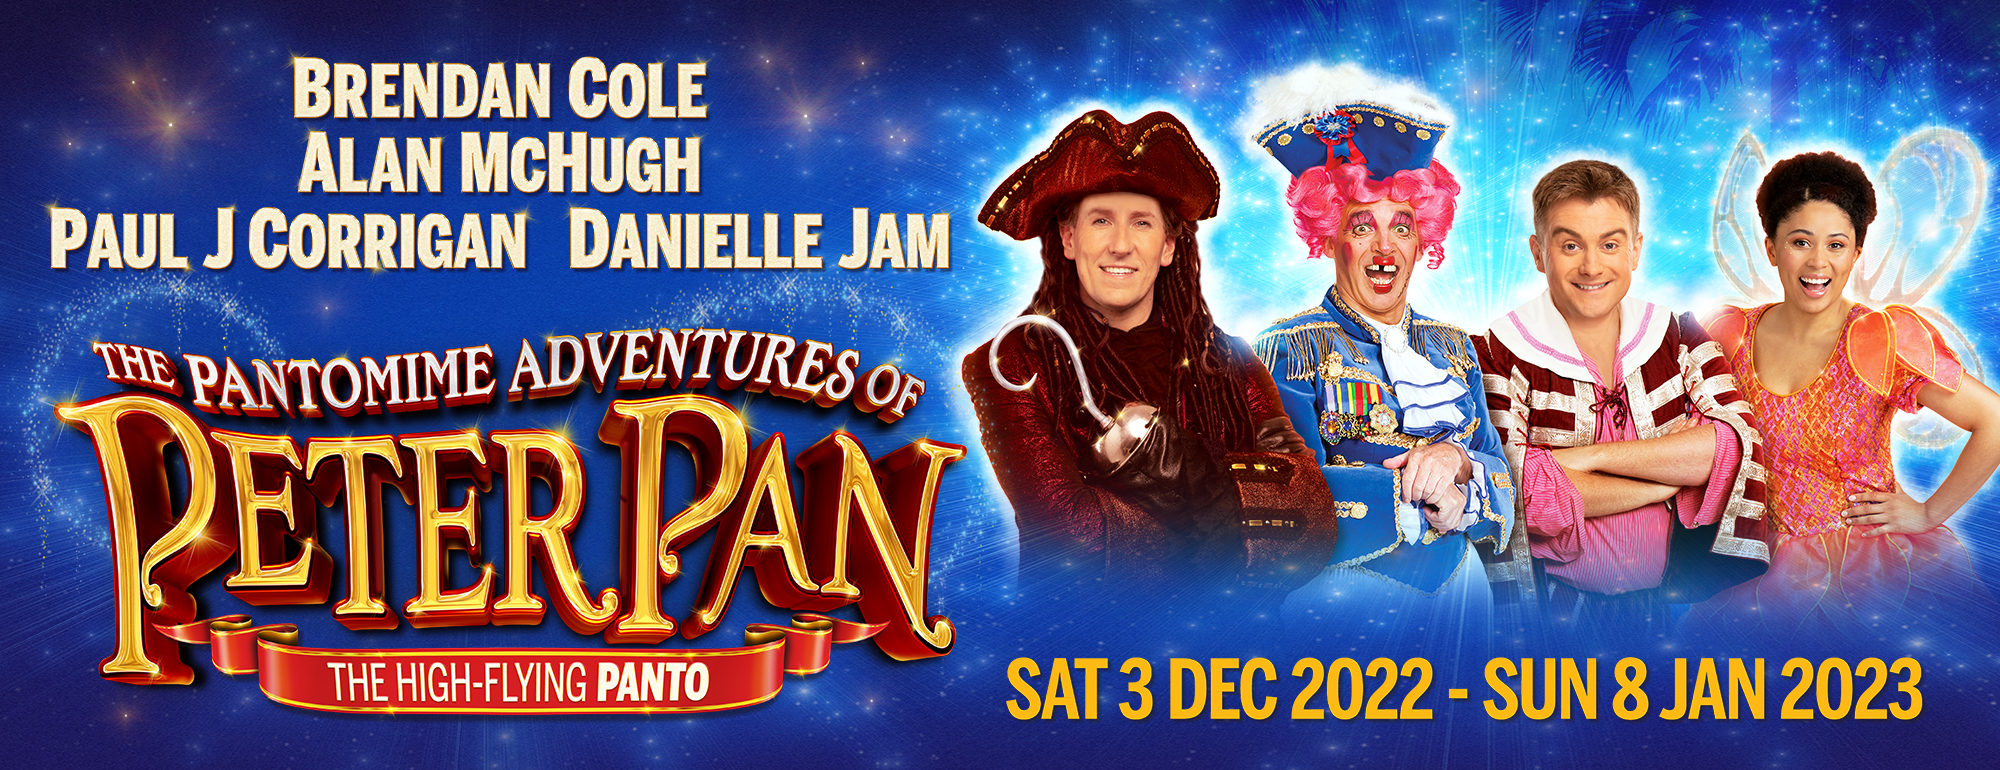 The Pantomime Adventures of Peter Pan | His Majesty's Theatre